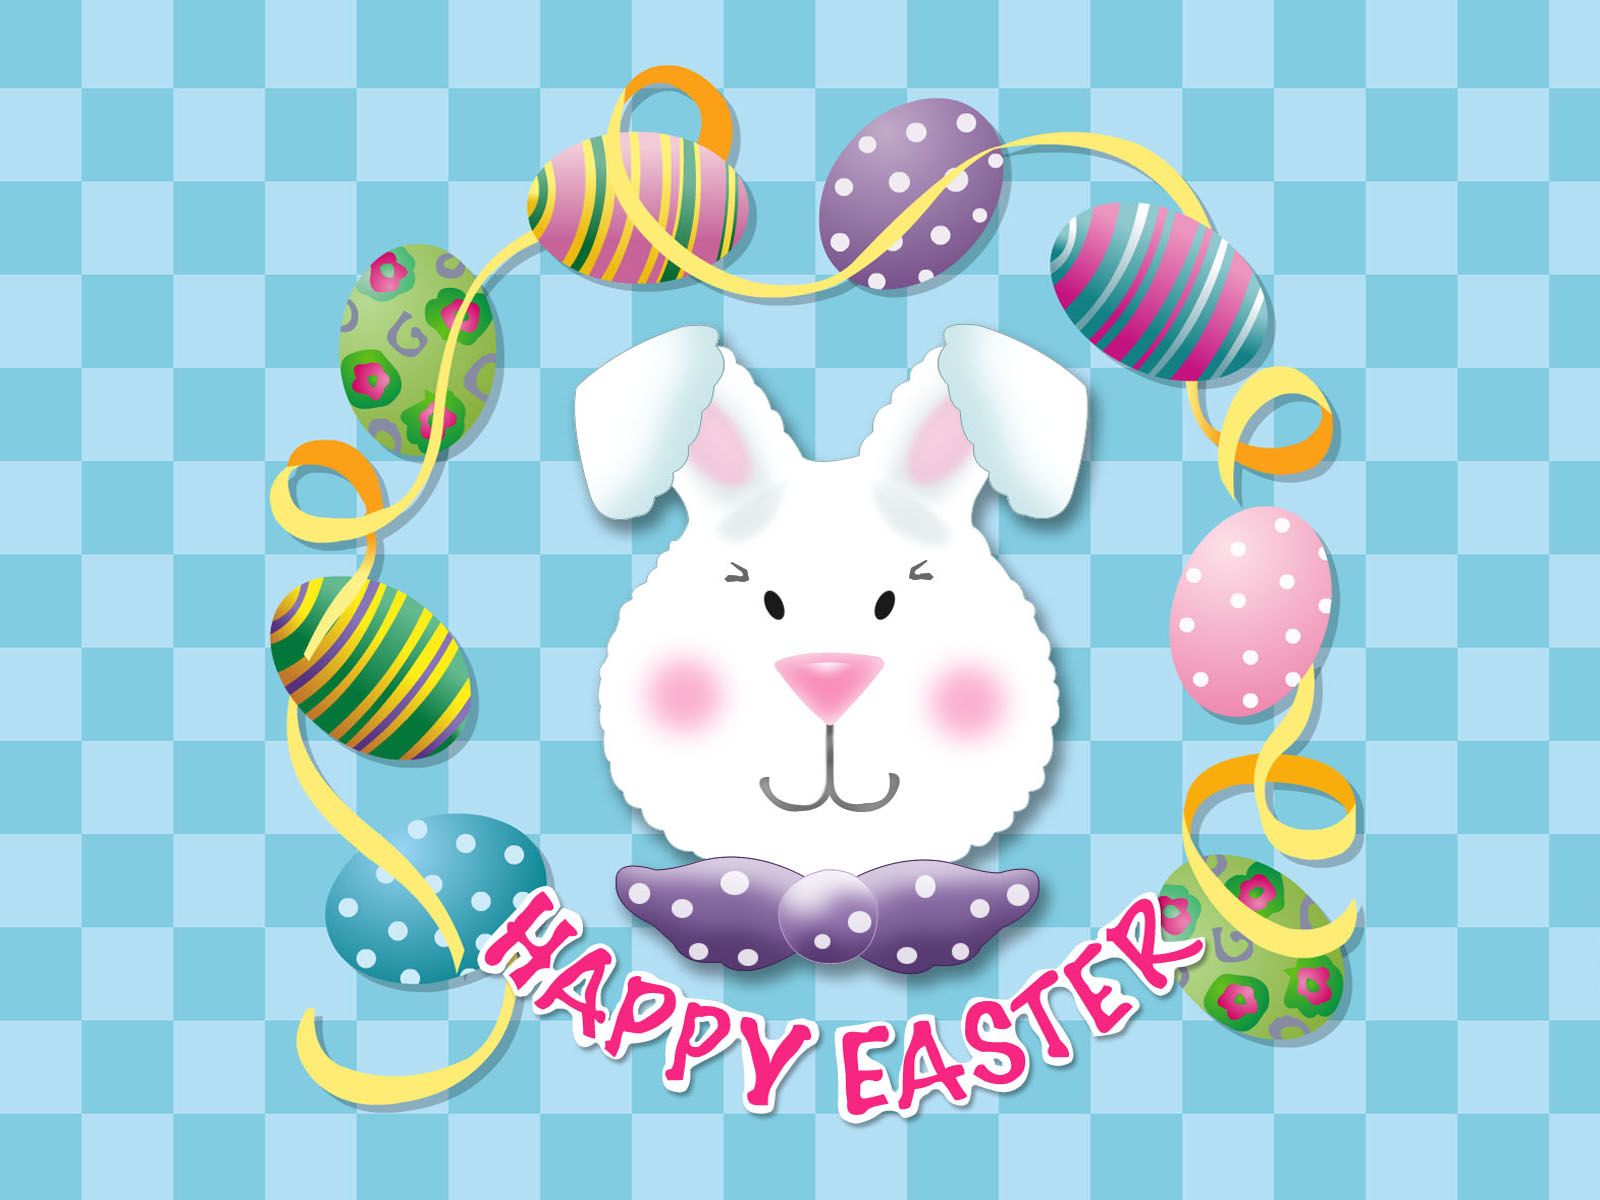 Happy Easter Bunny Quality Image